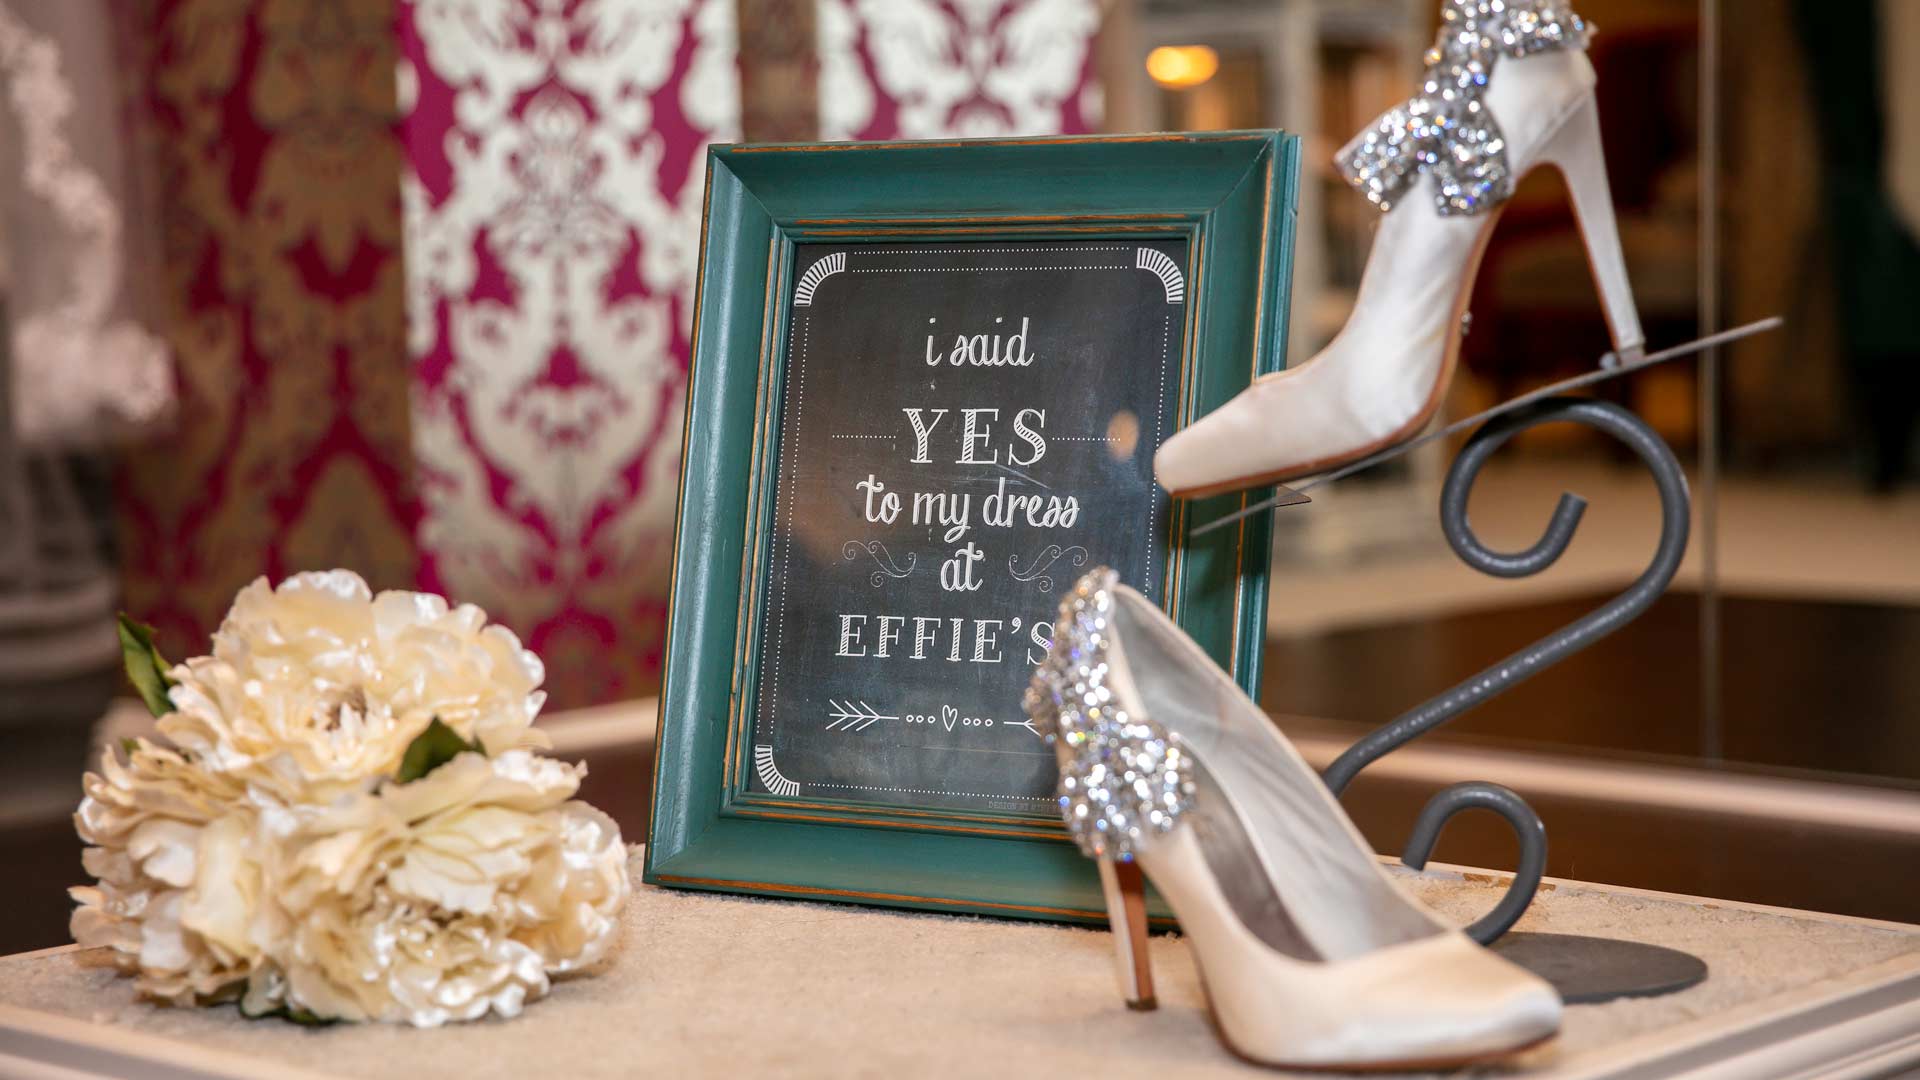 Bridal shoes and a bouquet on a table with chalkboard with "I said YES to my dress at Effie's"